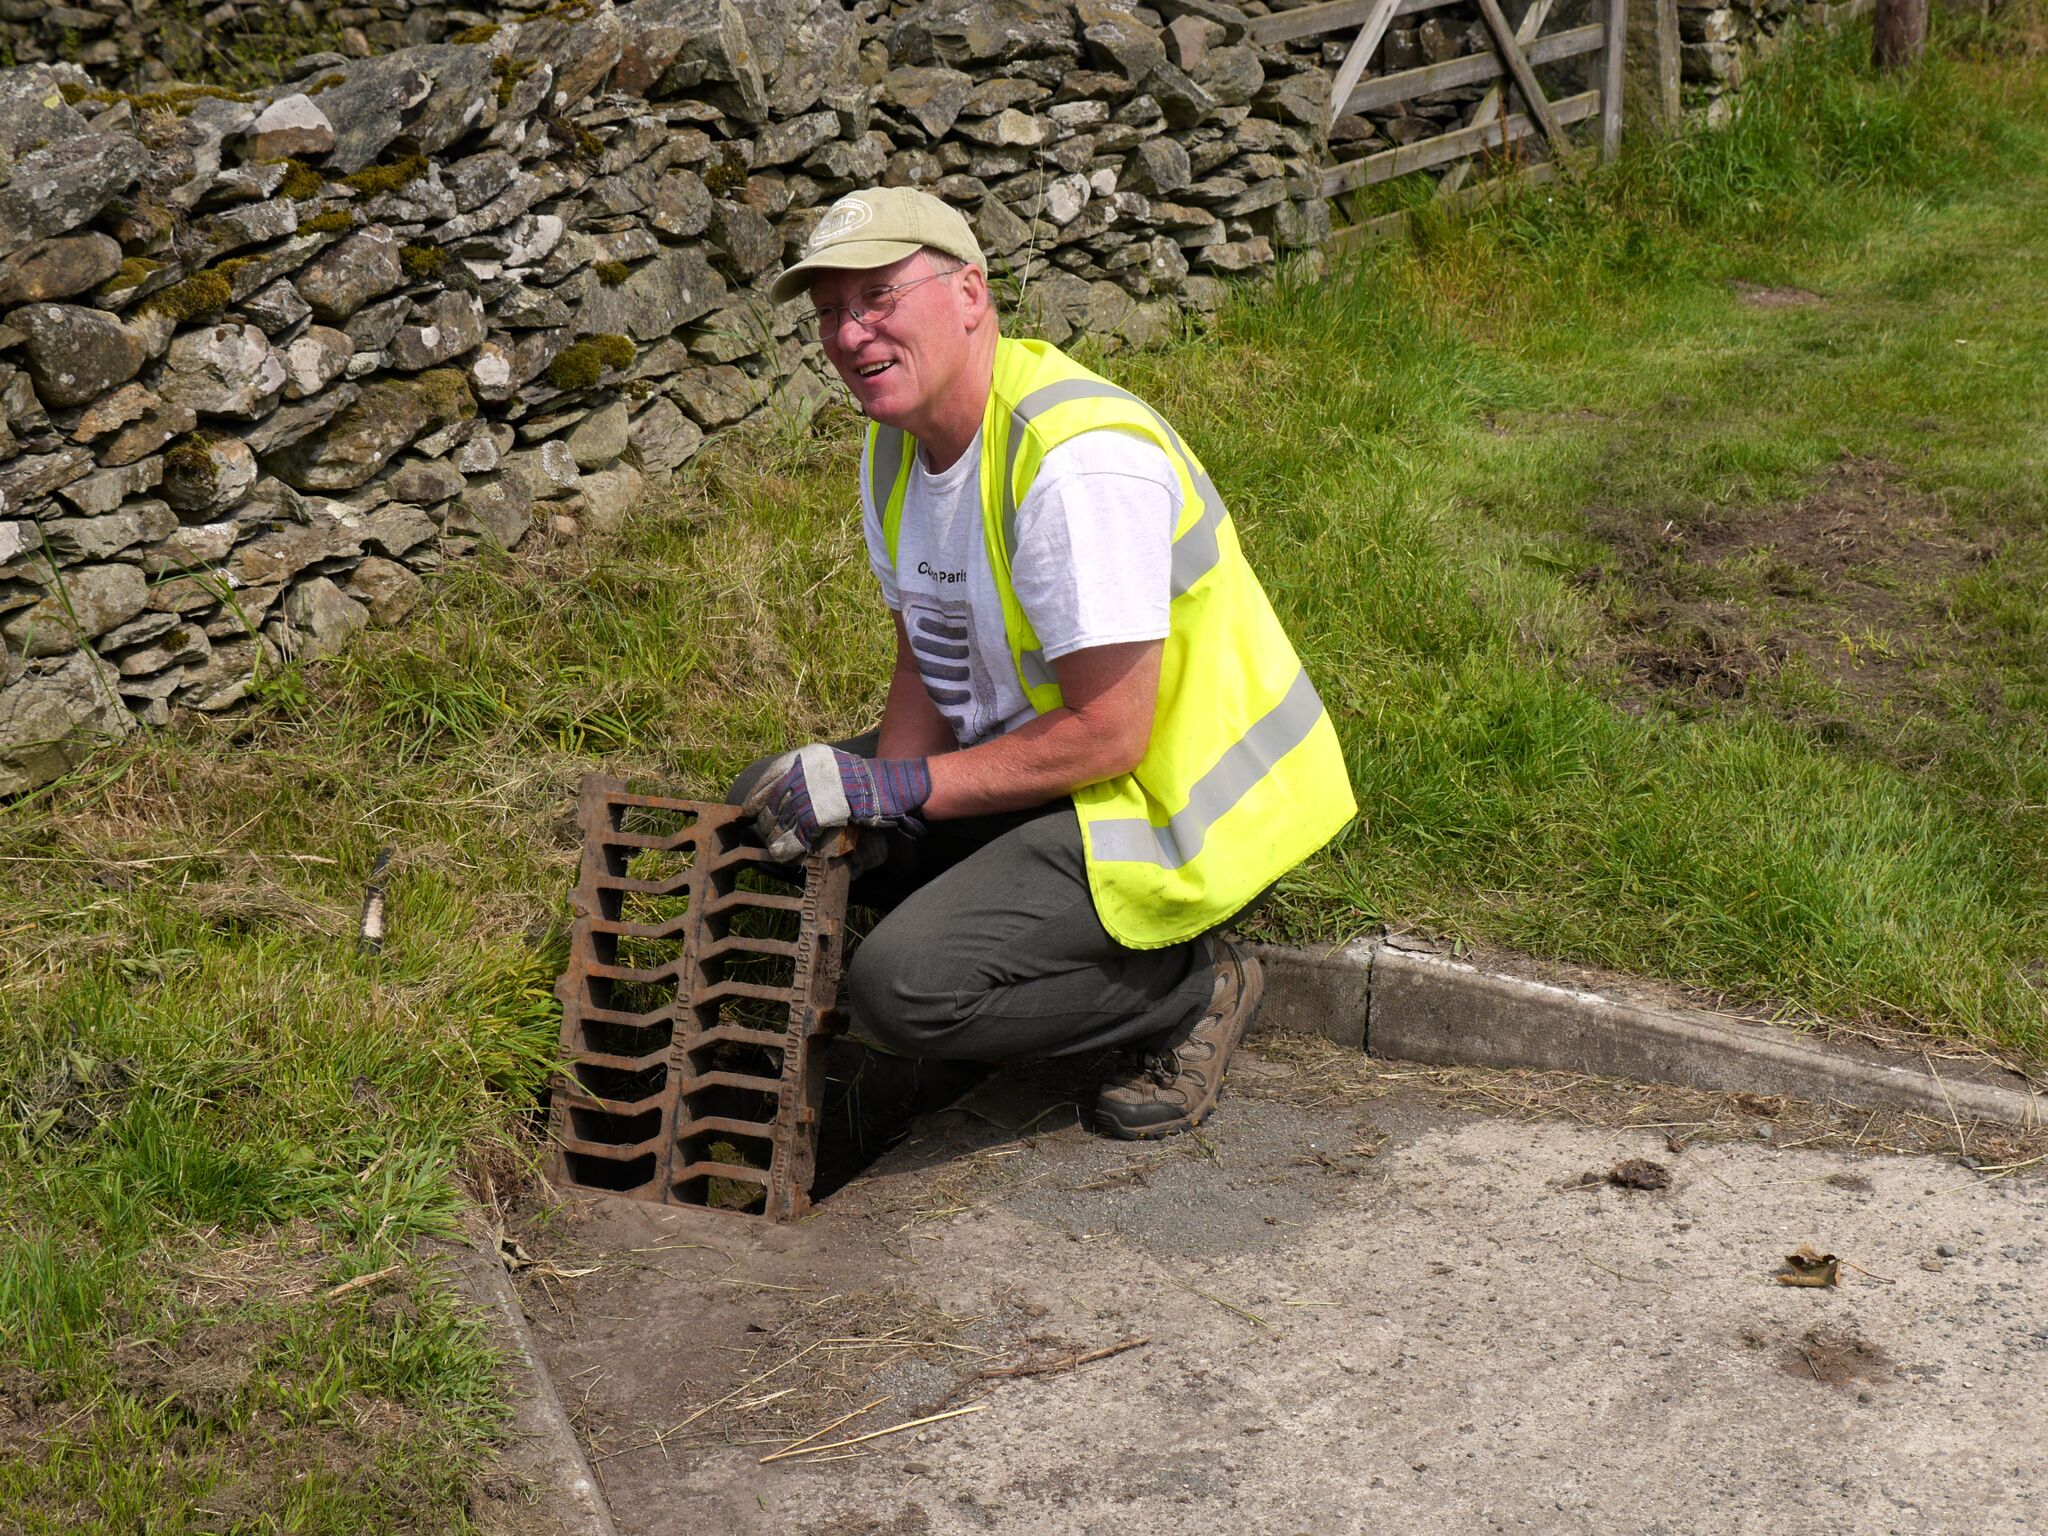 Drainspotter Archie Workman, ‘Anorak of the Year’, interviewed by BBC Radio Cumbria